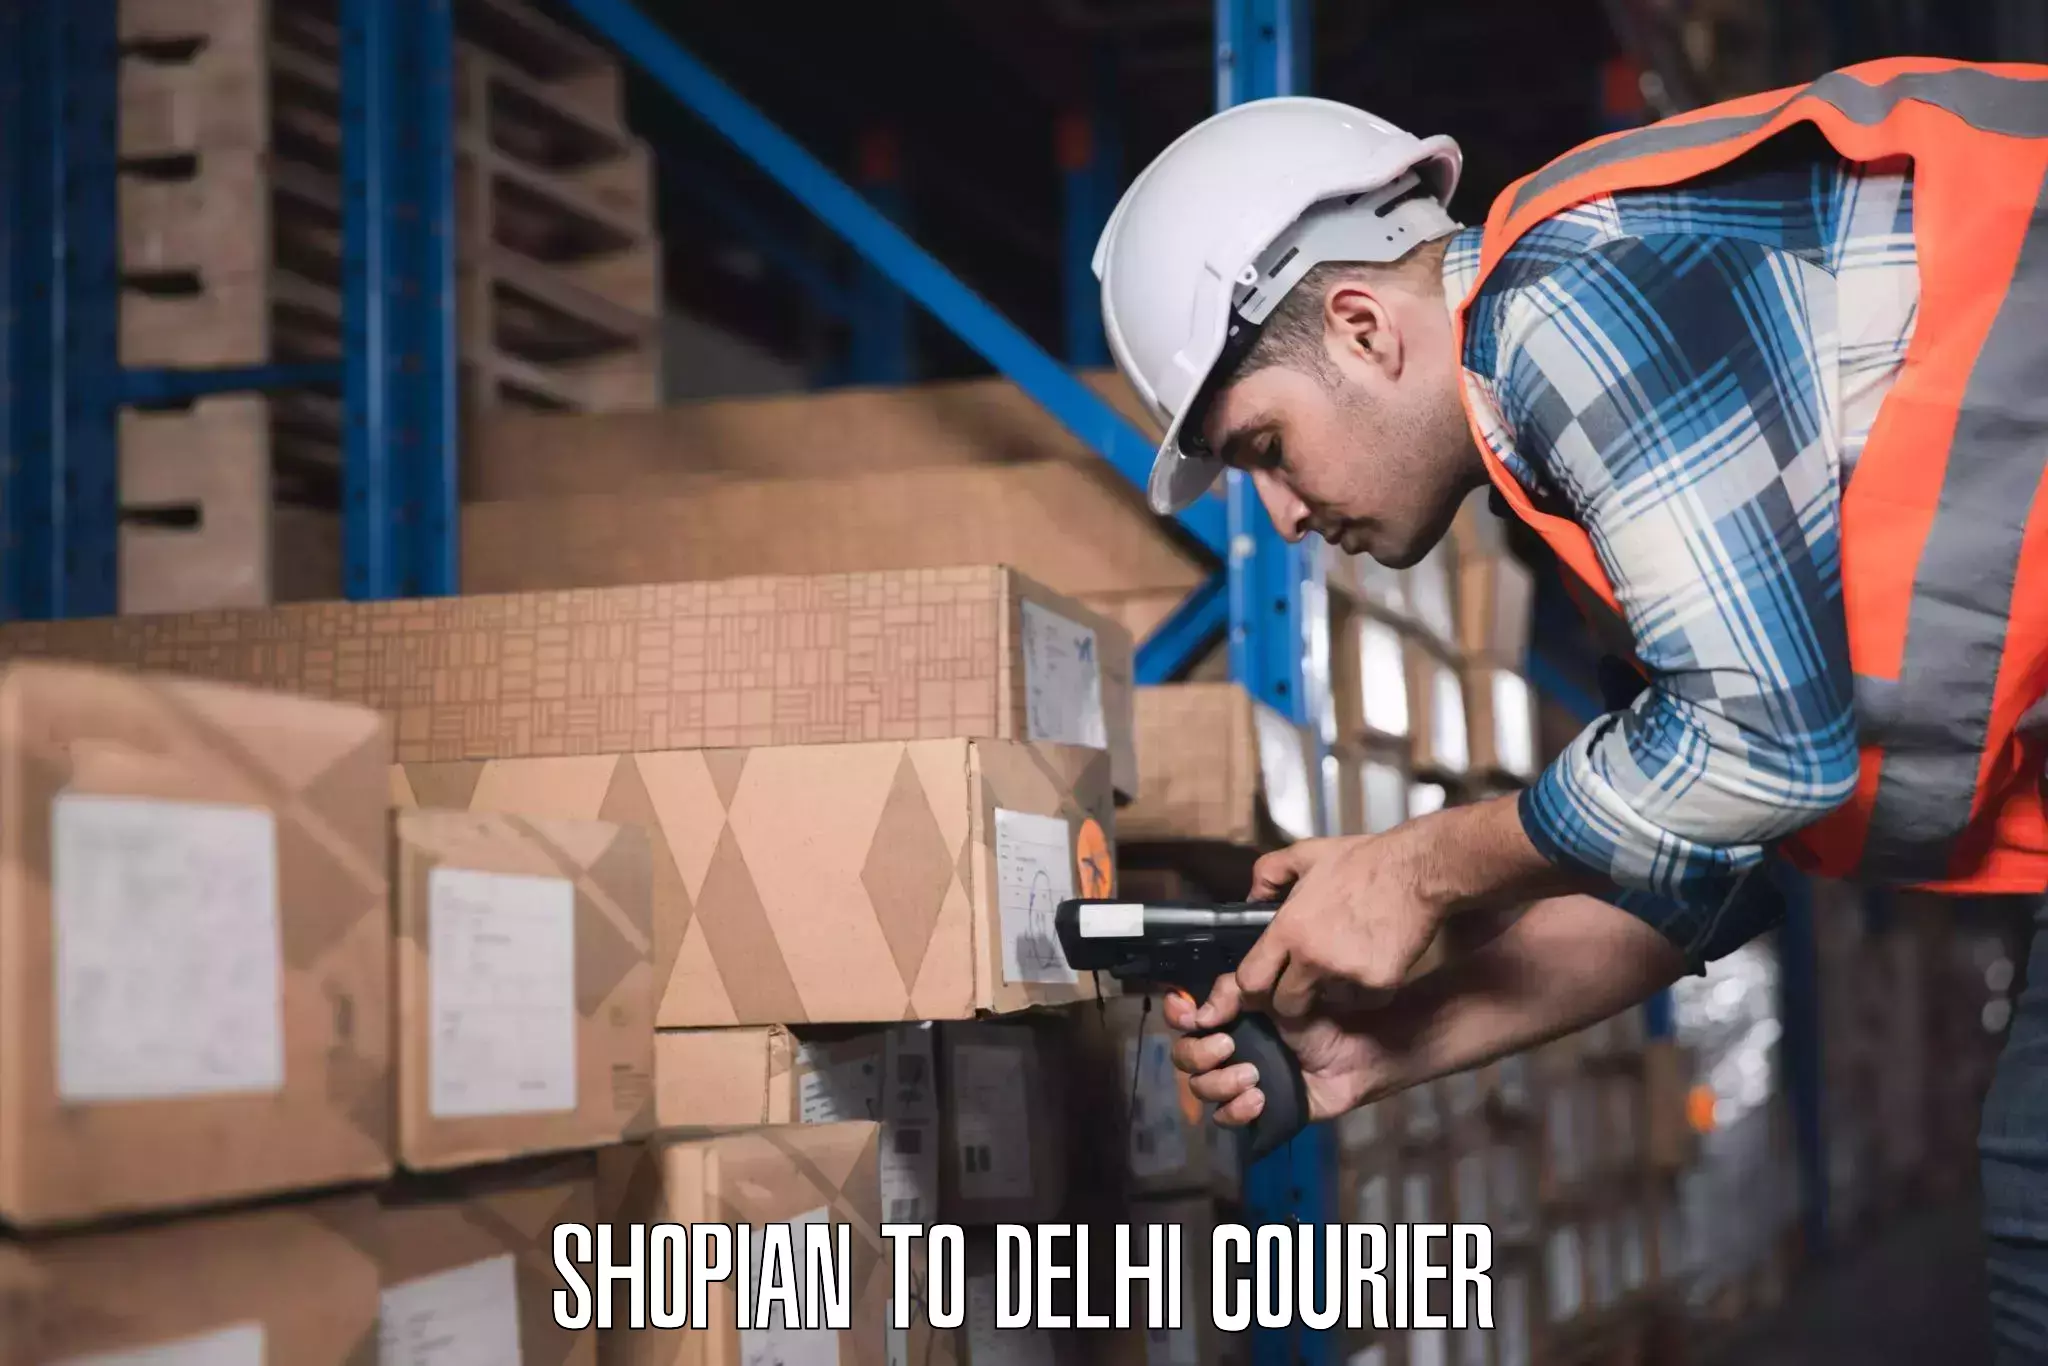 Luggage shipment specialists Shopian to University of Delhi